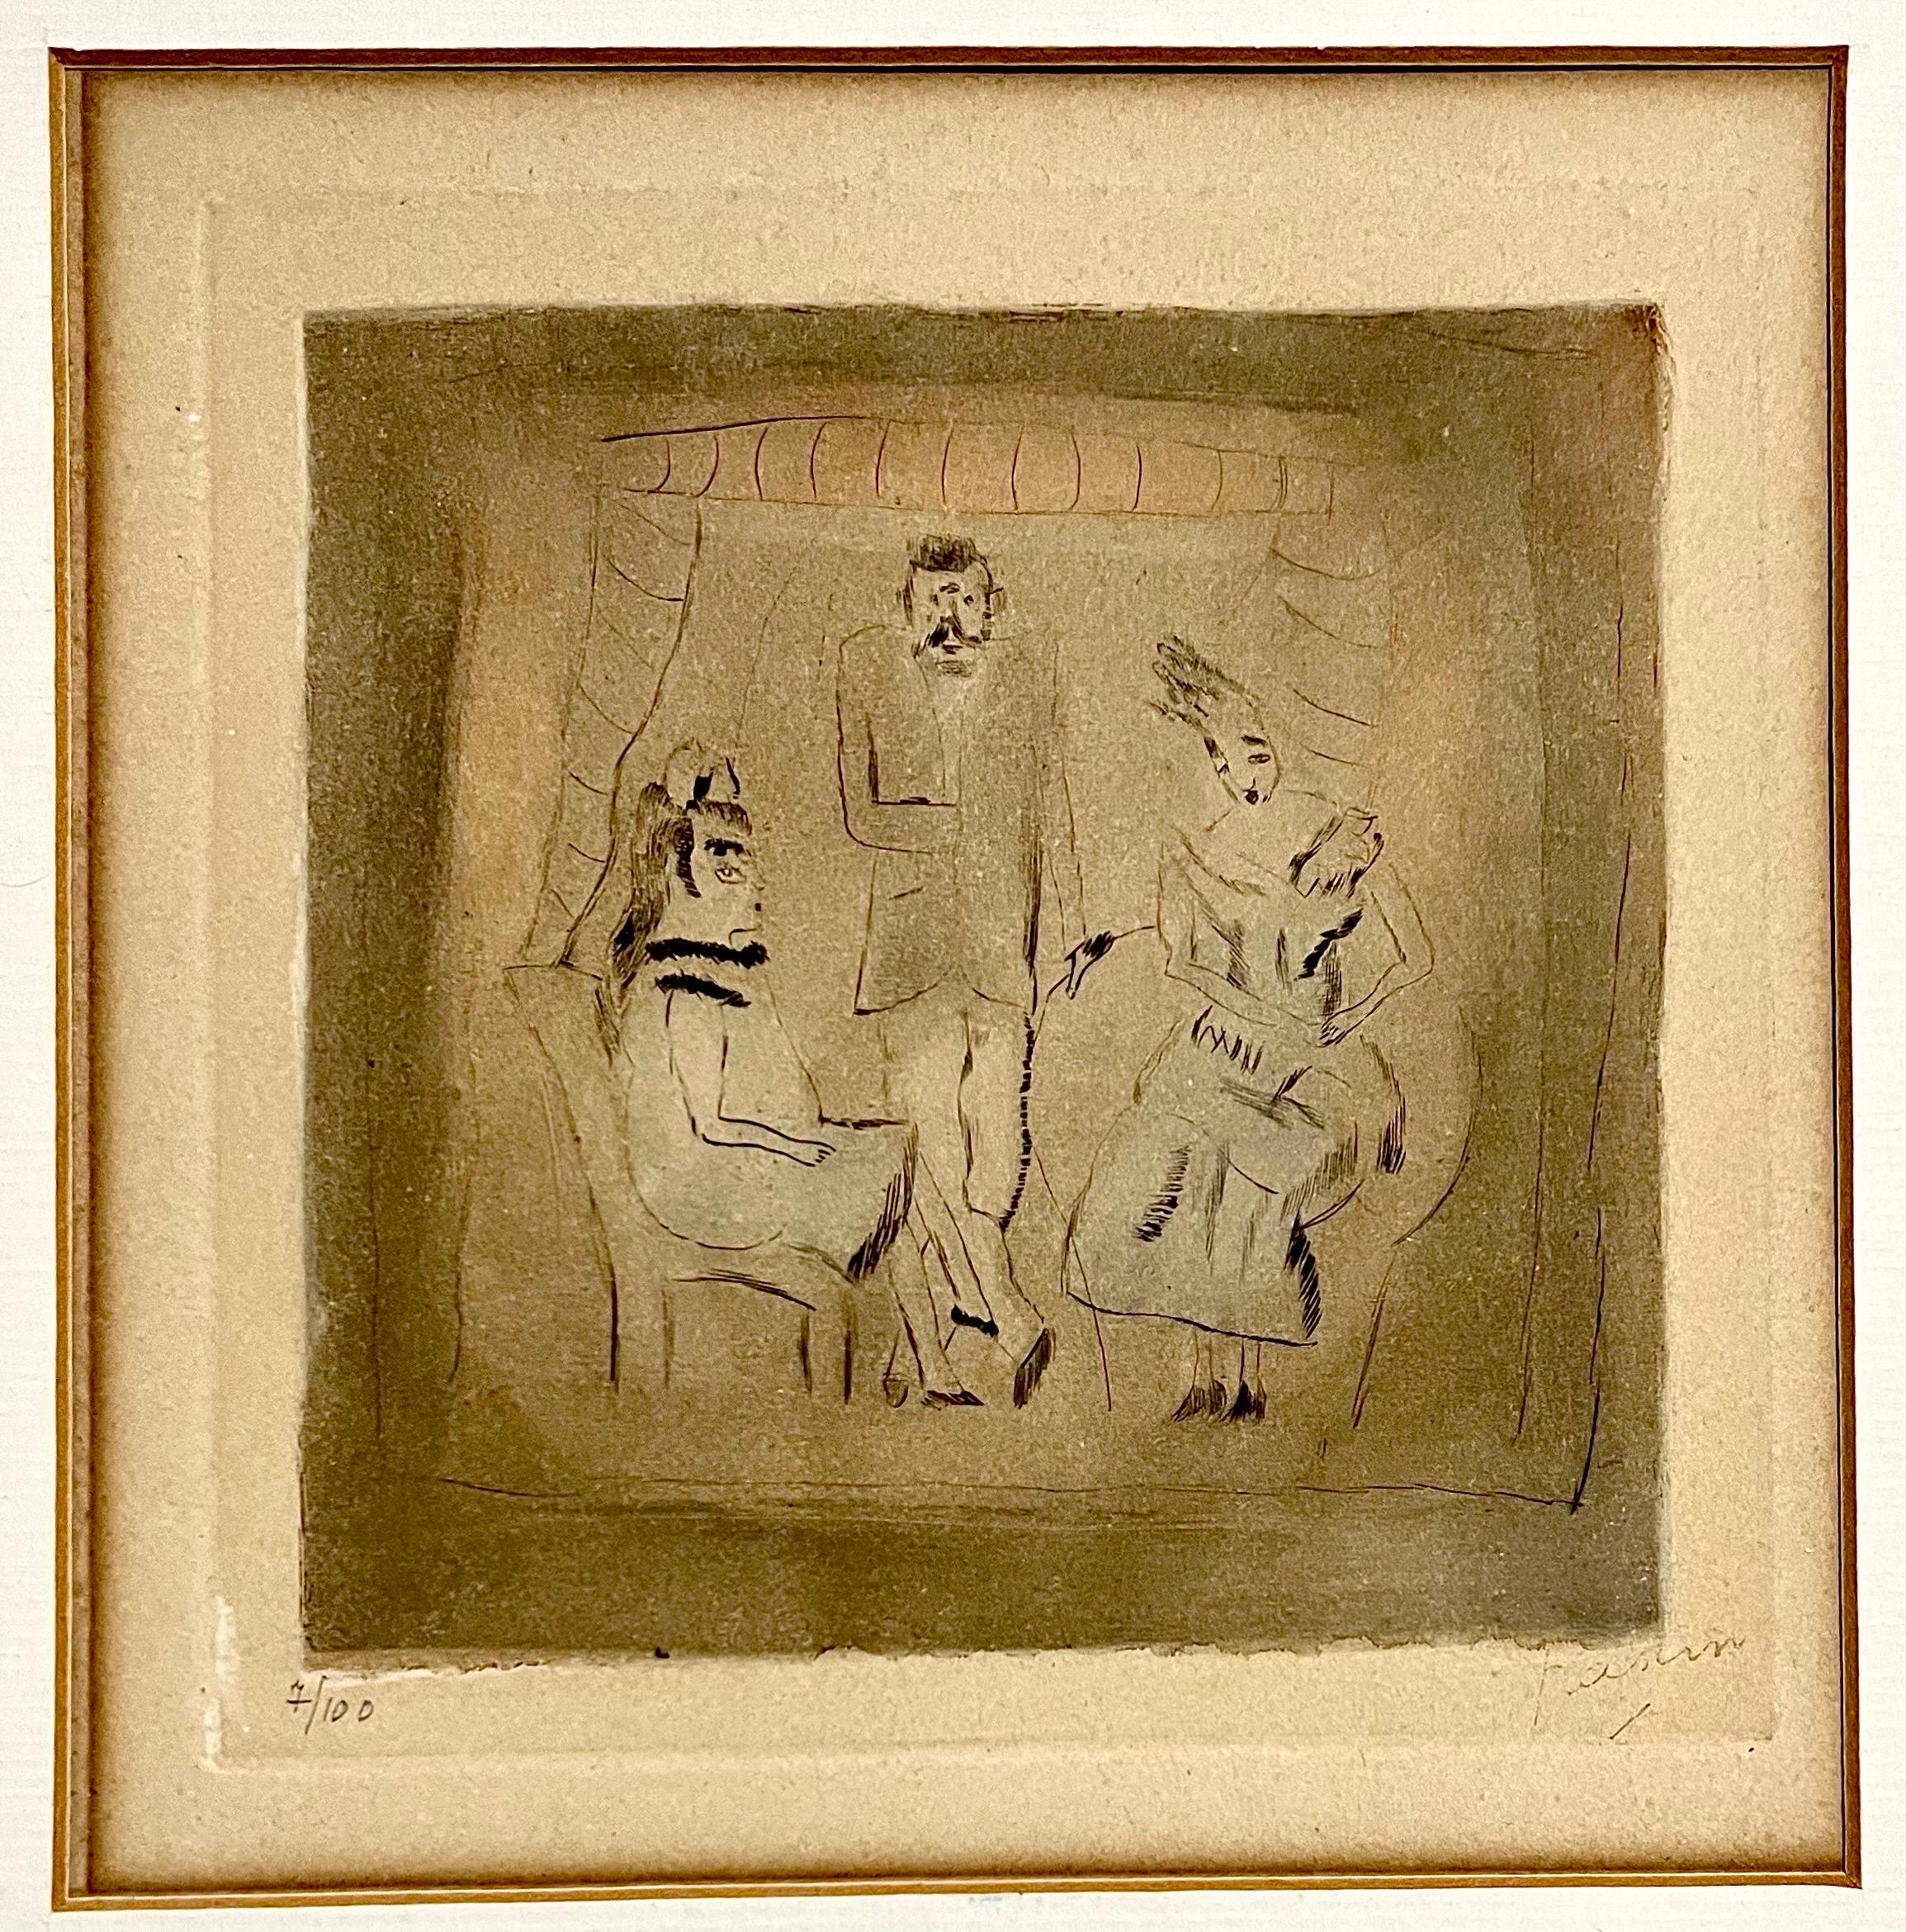 
Genre: German Expressionist
Subject: Three Noble figures, Noblesse
Medium: etching, watercolor paint (I have seen this described as an aquatint and have seen this without color, so i am assuming it is watercolor paint applied to it)
Surface: